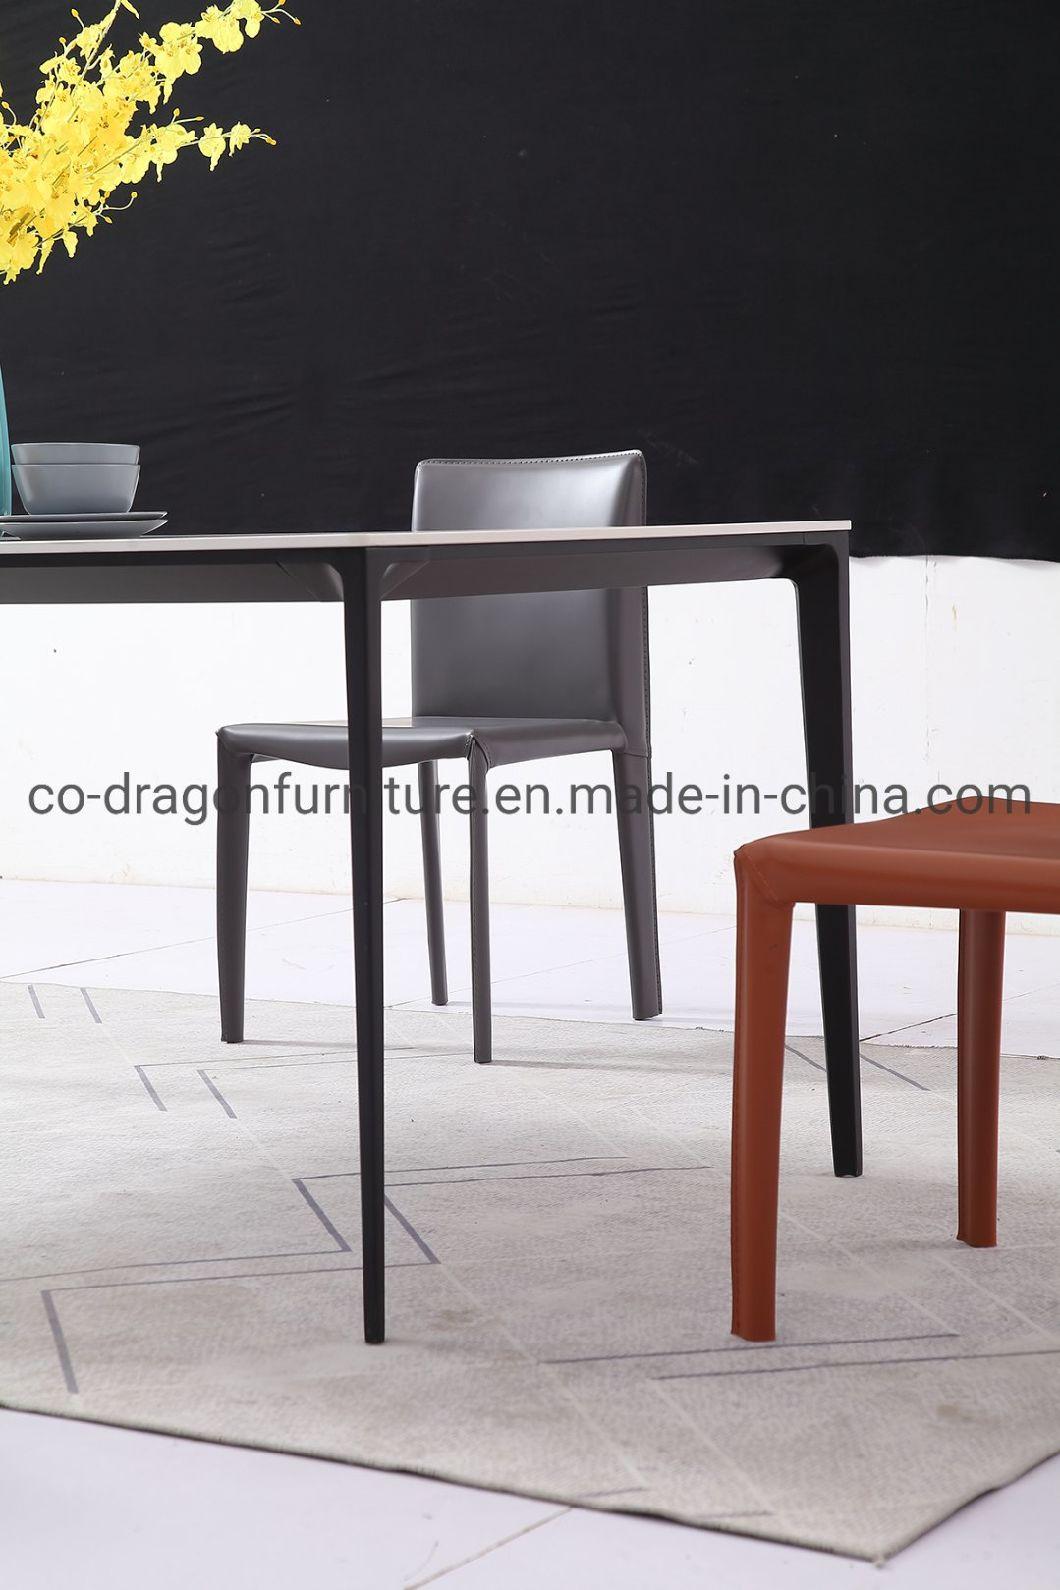 Modern Home Furniture Dining Table Sets with Rock Plate Top